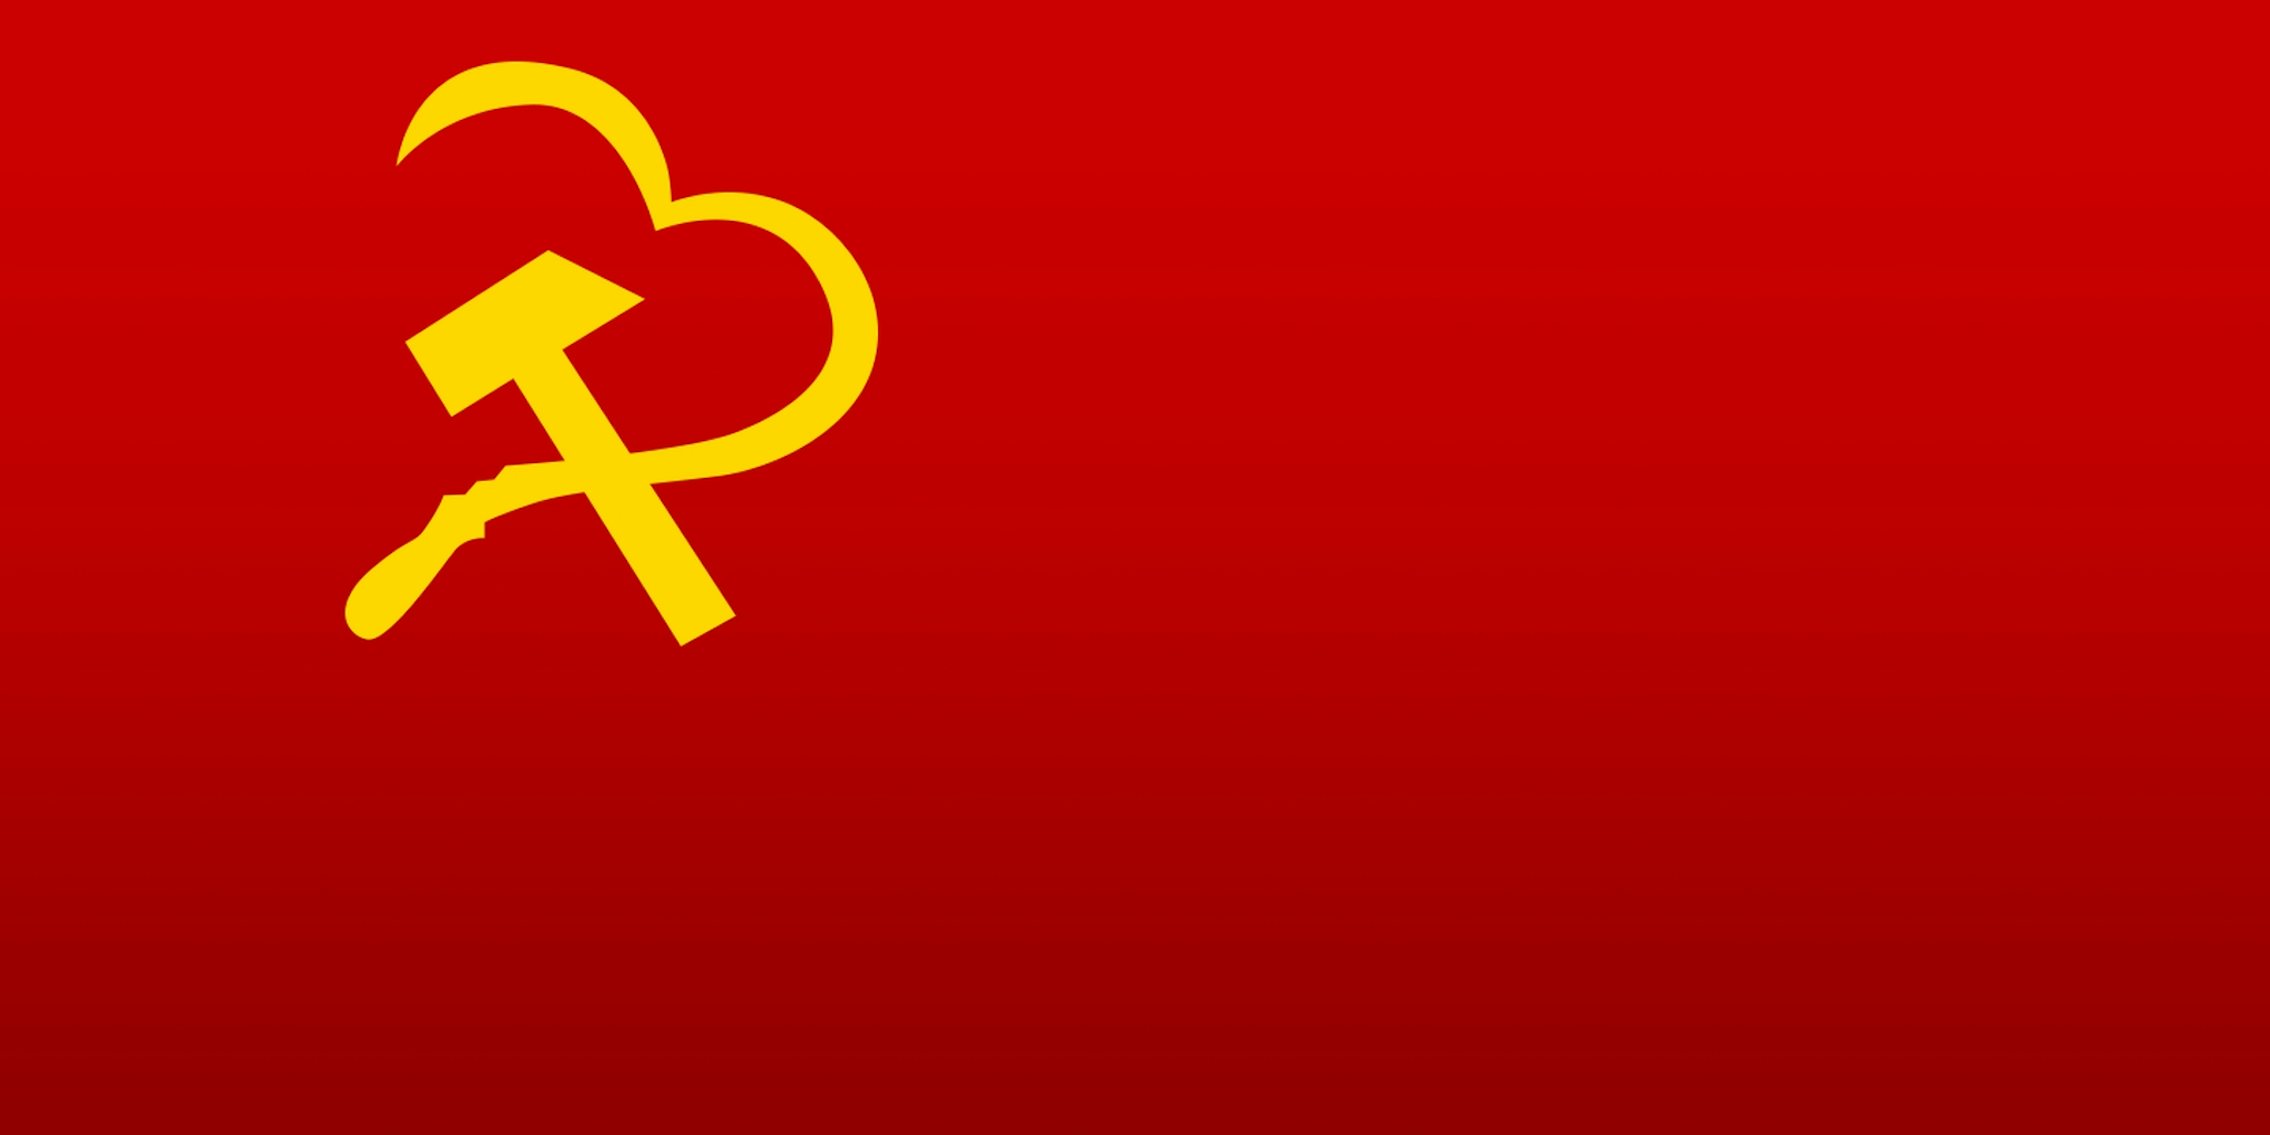 Meet OkComrade, the OkCupid for communists - The Daily Dot